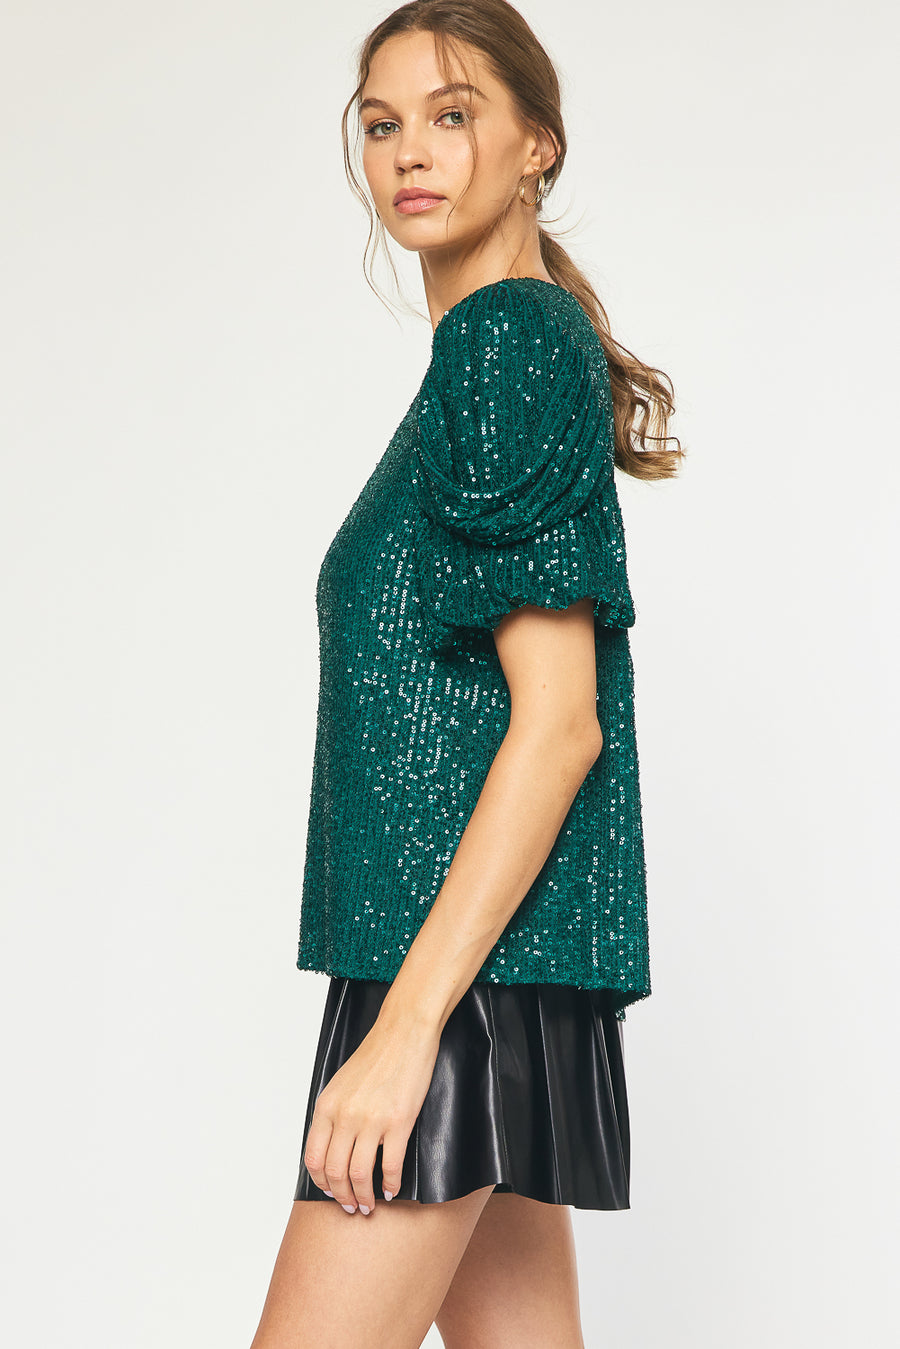 Sequin Top -Forest